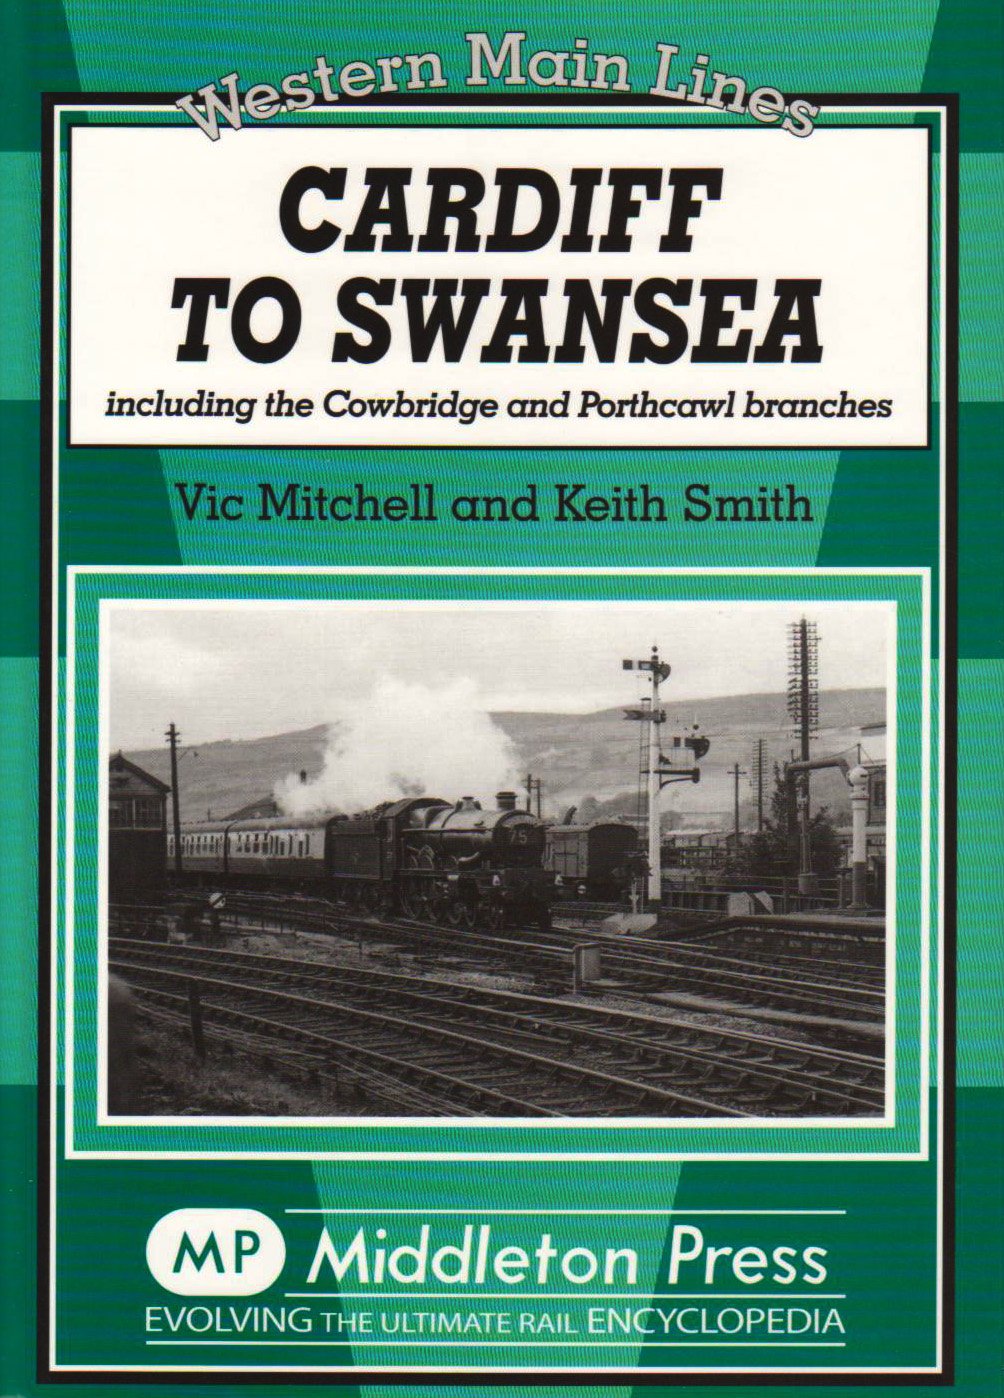 Western Main Lines Cardiff to Swansea including the Cowbridge and Porthcawl branches OUT OF PRINT TO BE REPRINTED